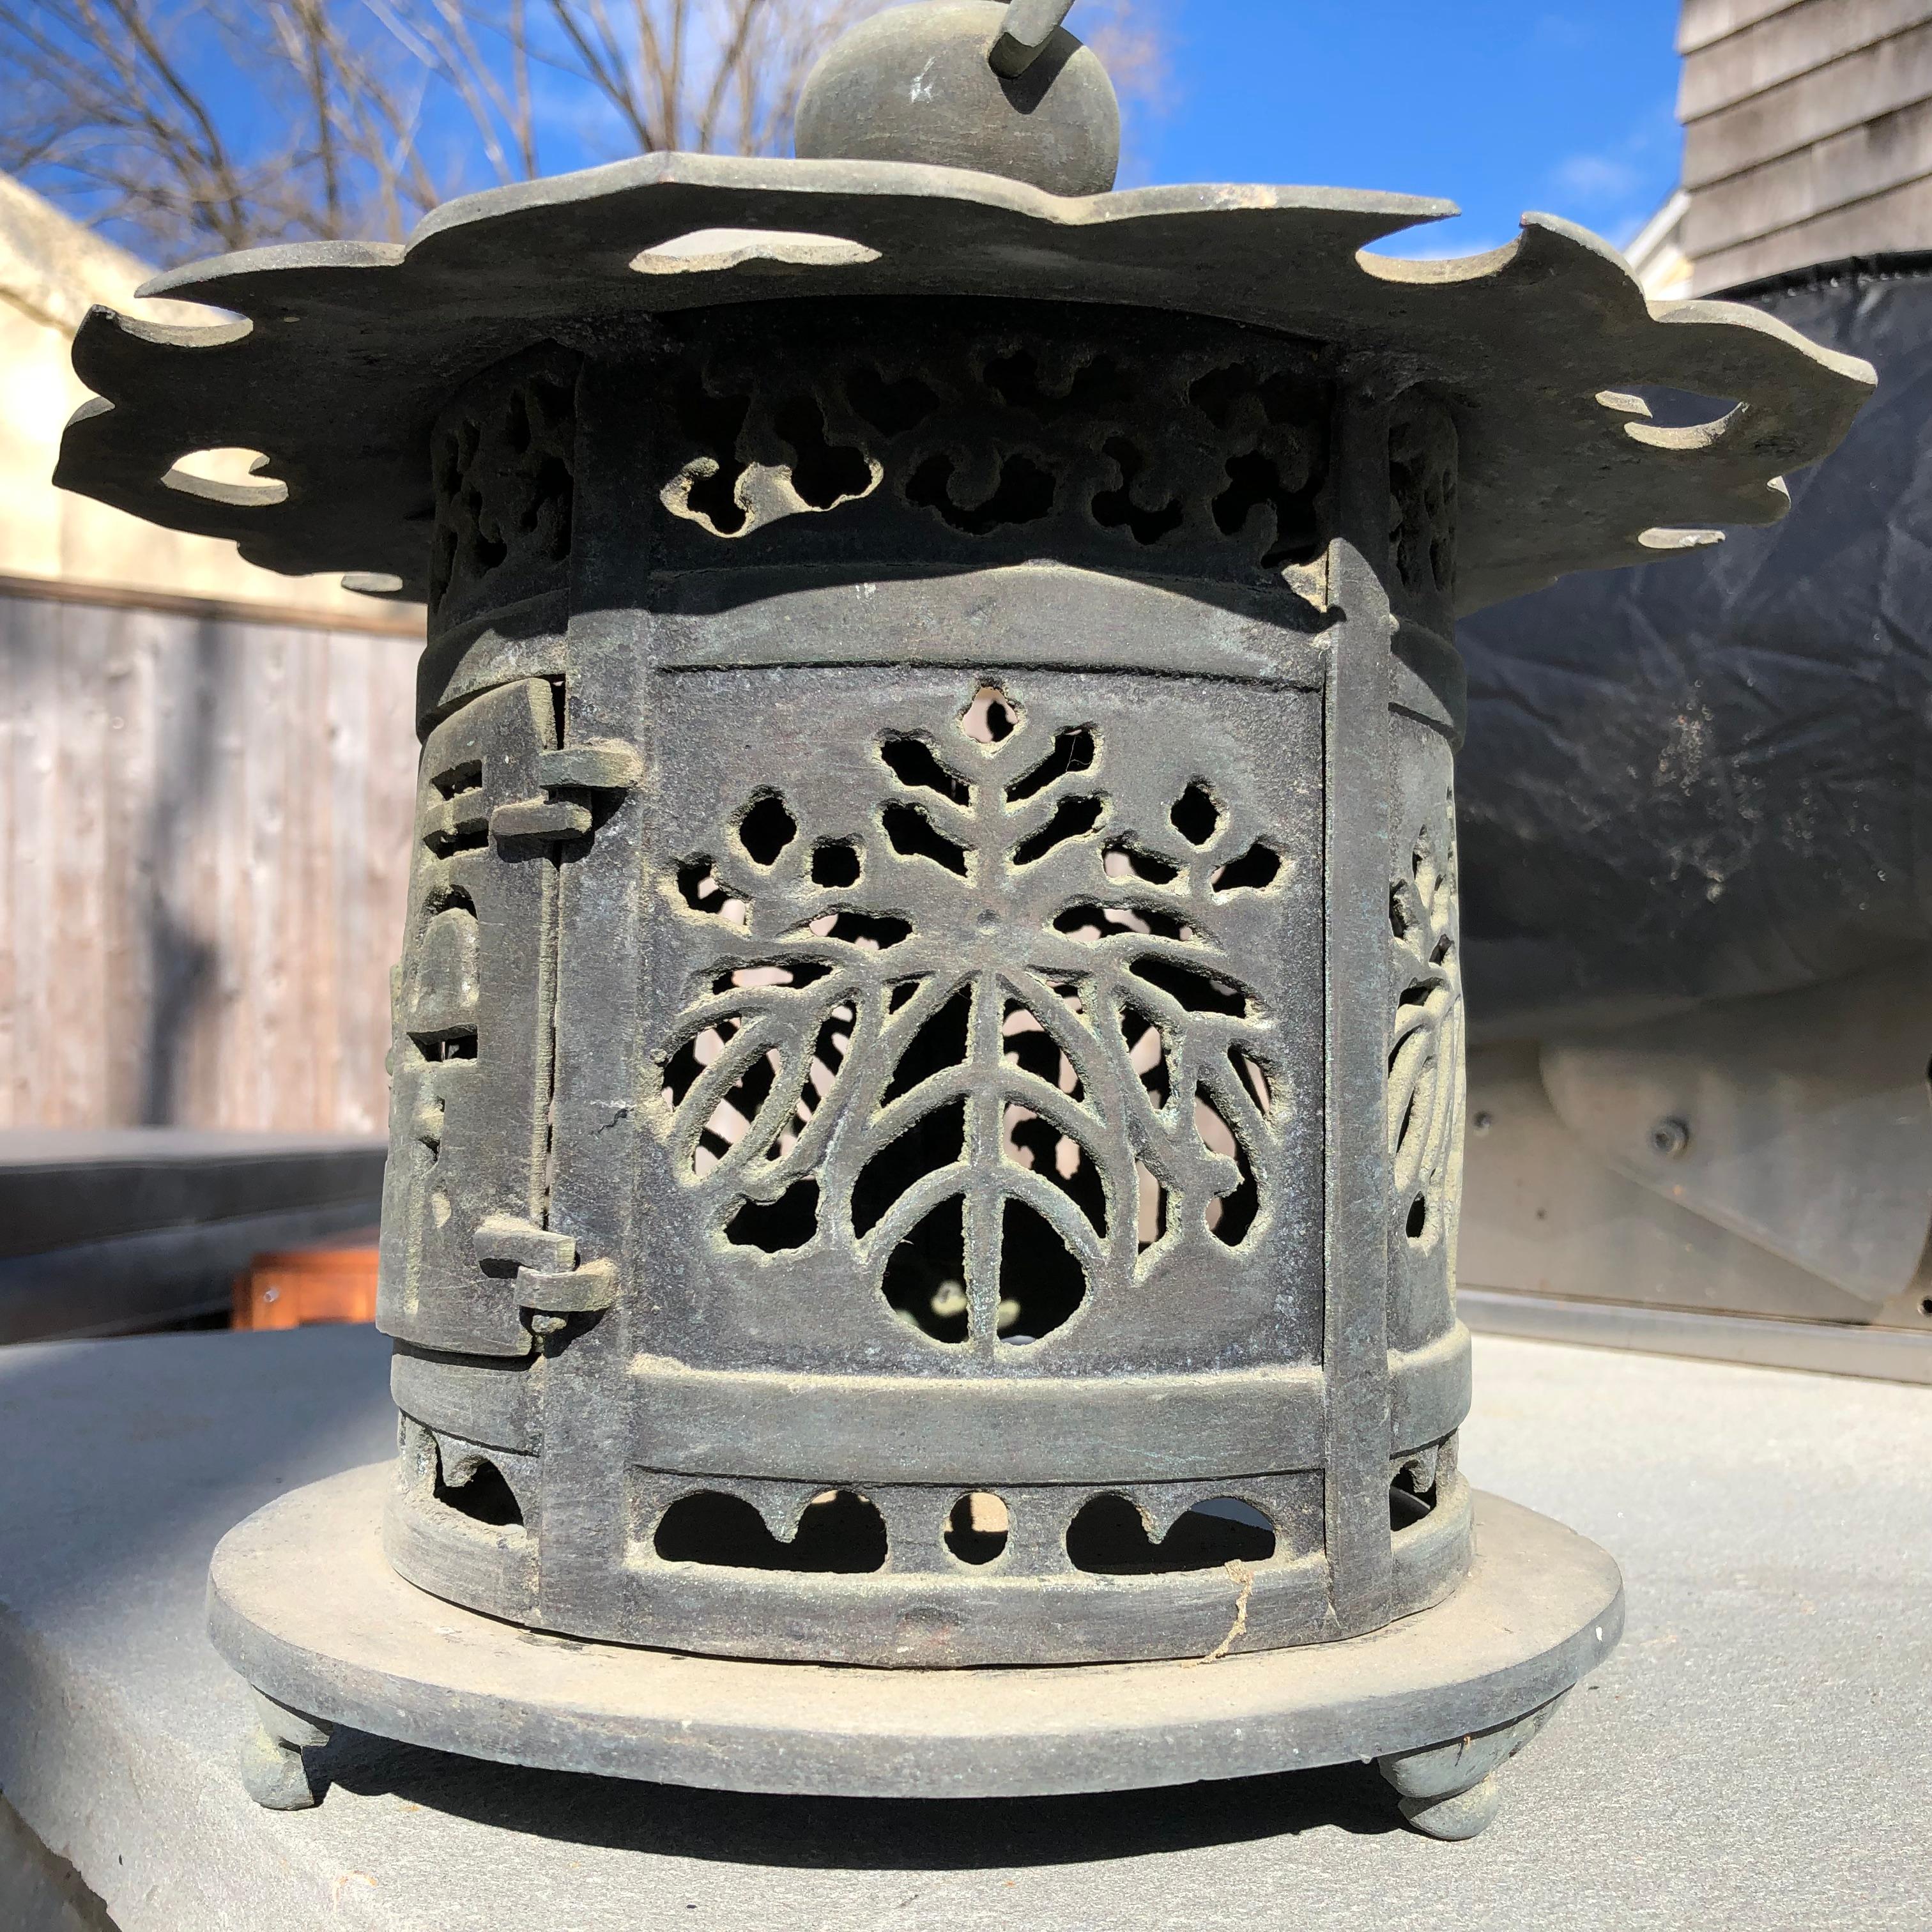 For your home, deck or favorite garden space - hang or place on its tripod feet

Japan, a fine large antique heavy and hand cast bronze lantern with exquisite details of flowers and hearts , and cast from the early Taisho period- one of the finest